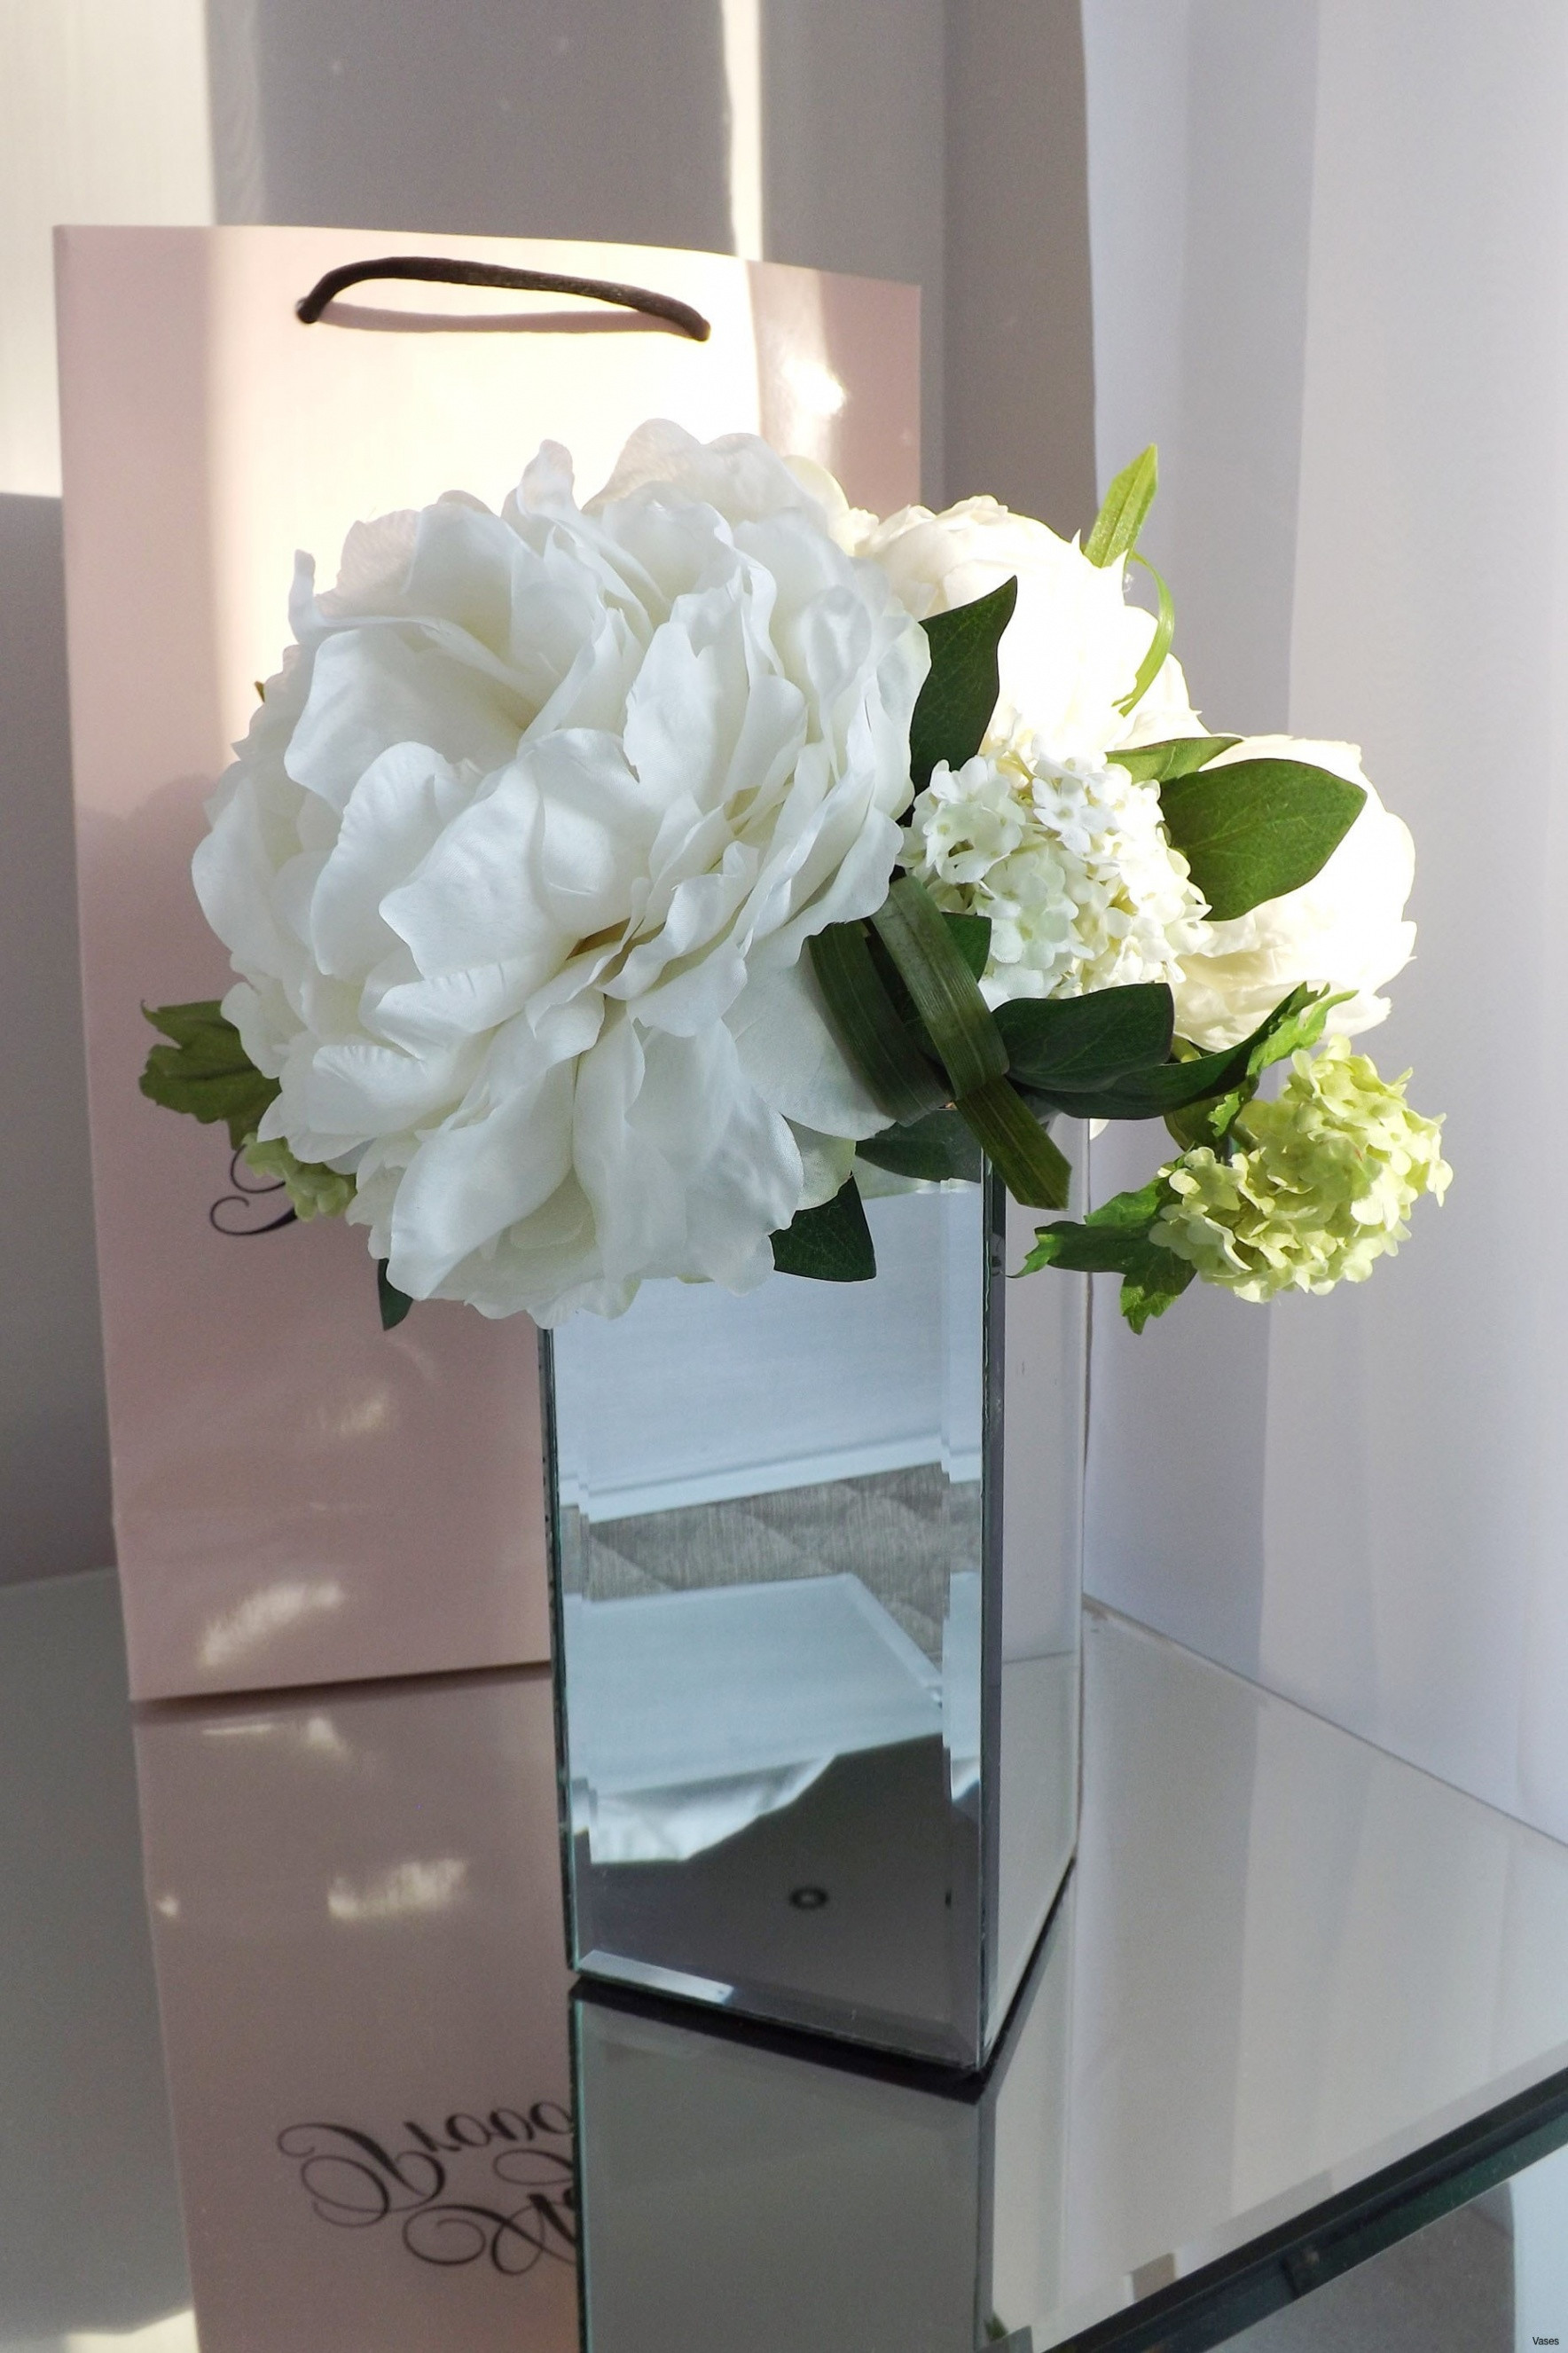 29 Famous White Glass Vases wholesale 2024 free download white glass vases wholesale of h vases wall hanging flower vase newspaper i 0d scheme wall scheme with regard to image de metal vases 3h mirrored mosaic vase votivei 0d hobby lobby canada to